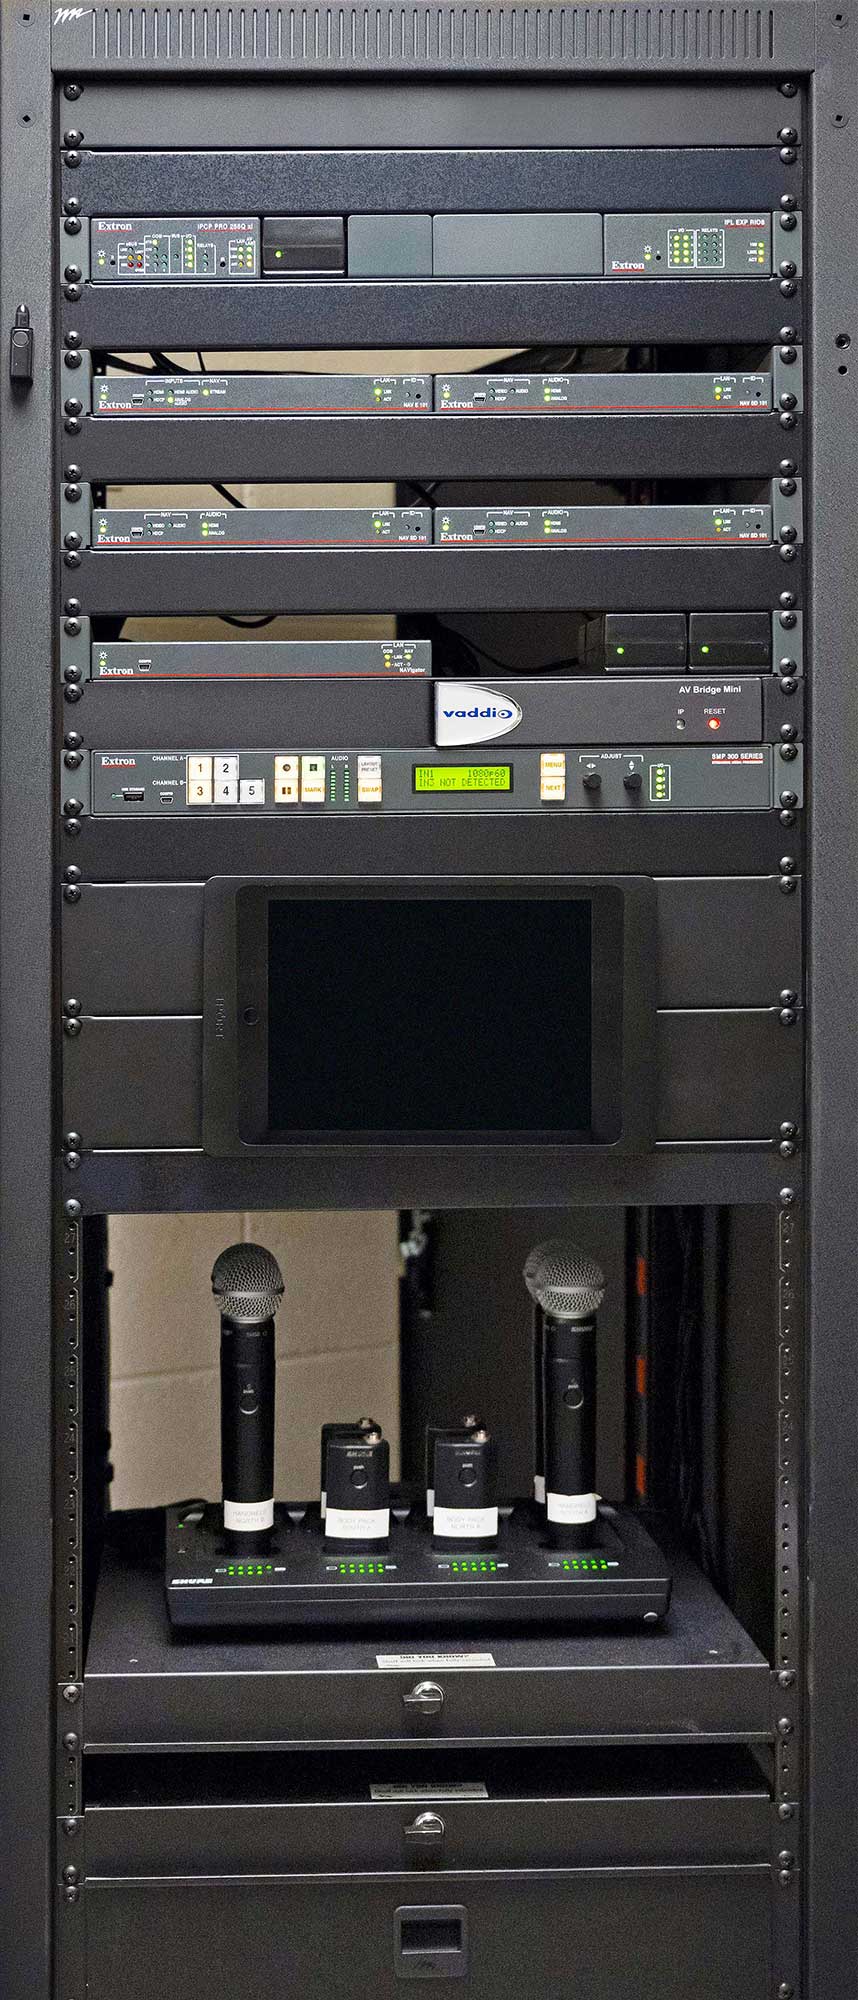 AV rack. From top: IPCP Pro control processors, NAV Pro encoders and decoders, NAVigator, and SMP 352 streaming media processor. iPad and wireless mics on charging docks.